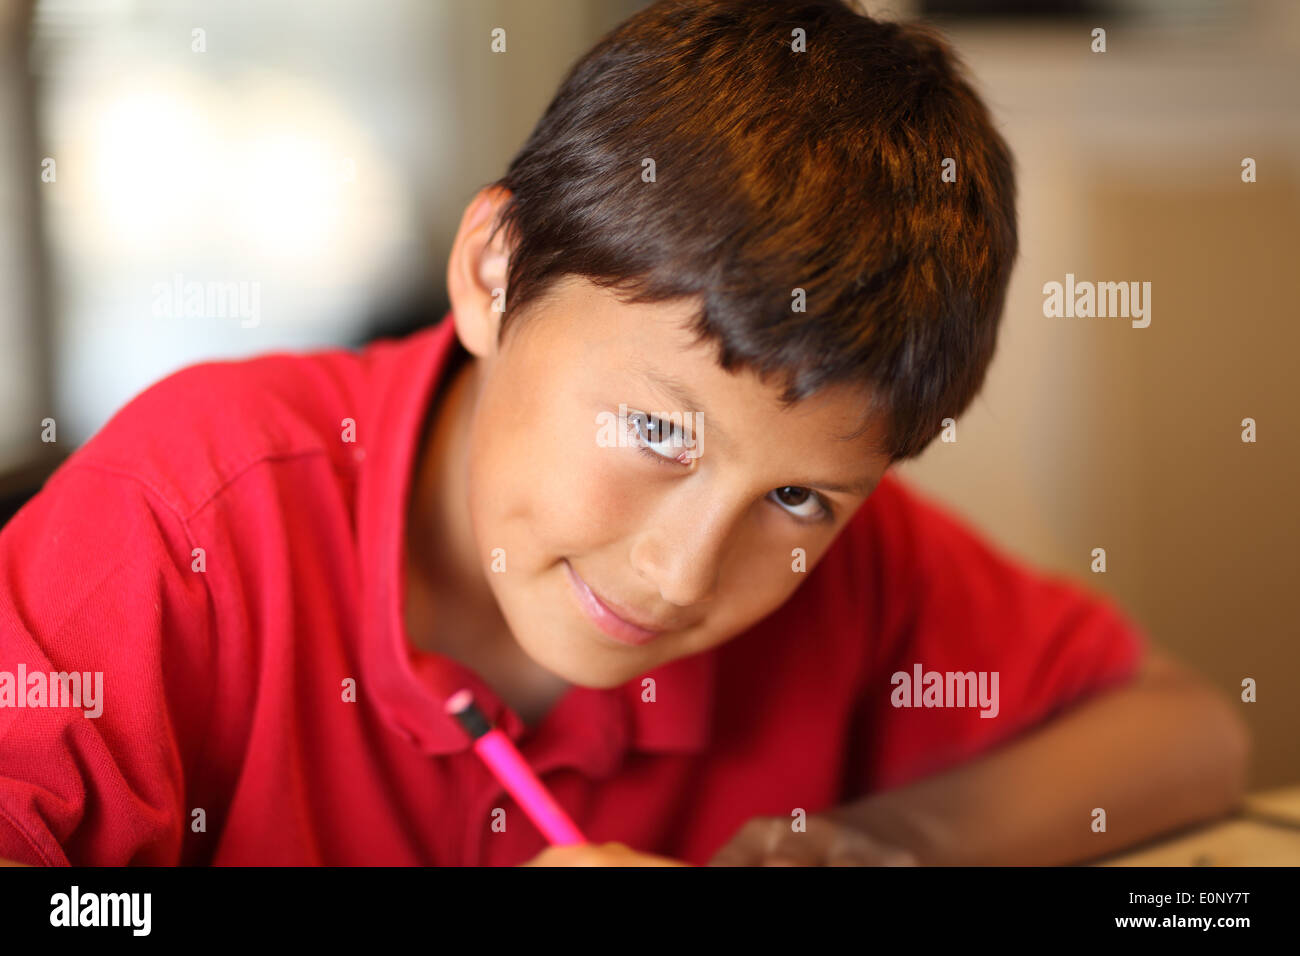 Young boy drawing for his homework - shallow depth of field Stock Photo